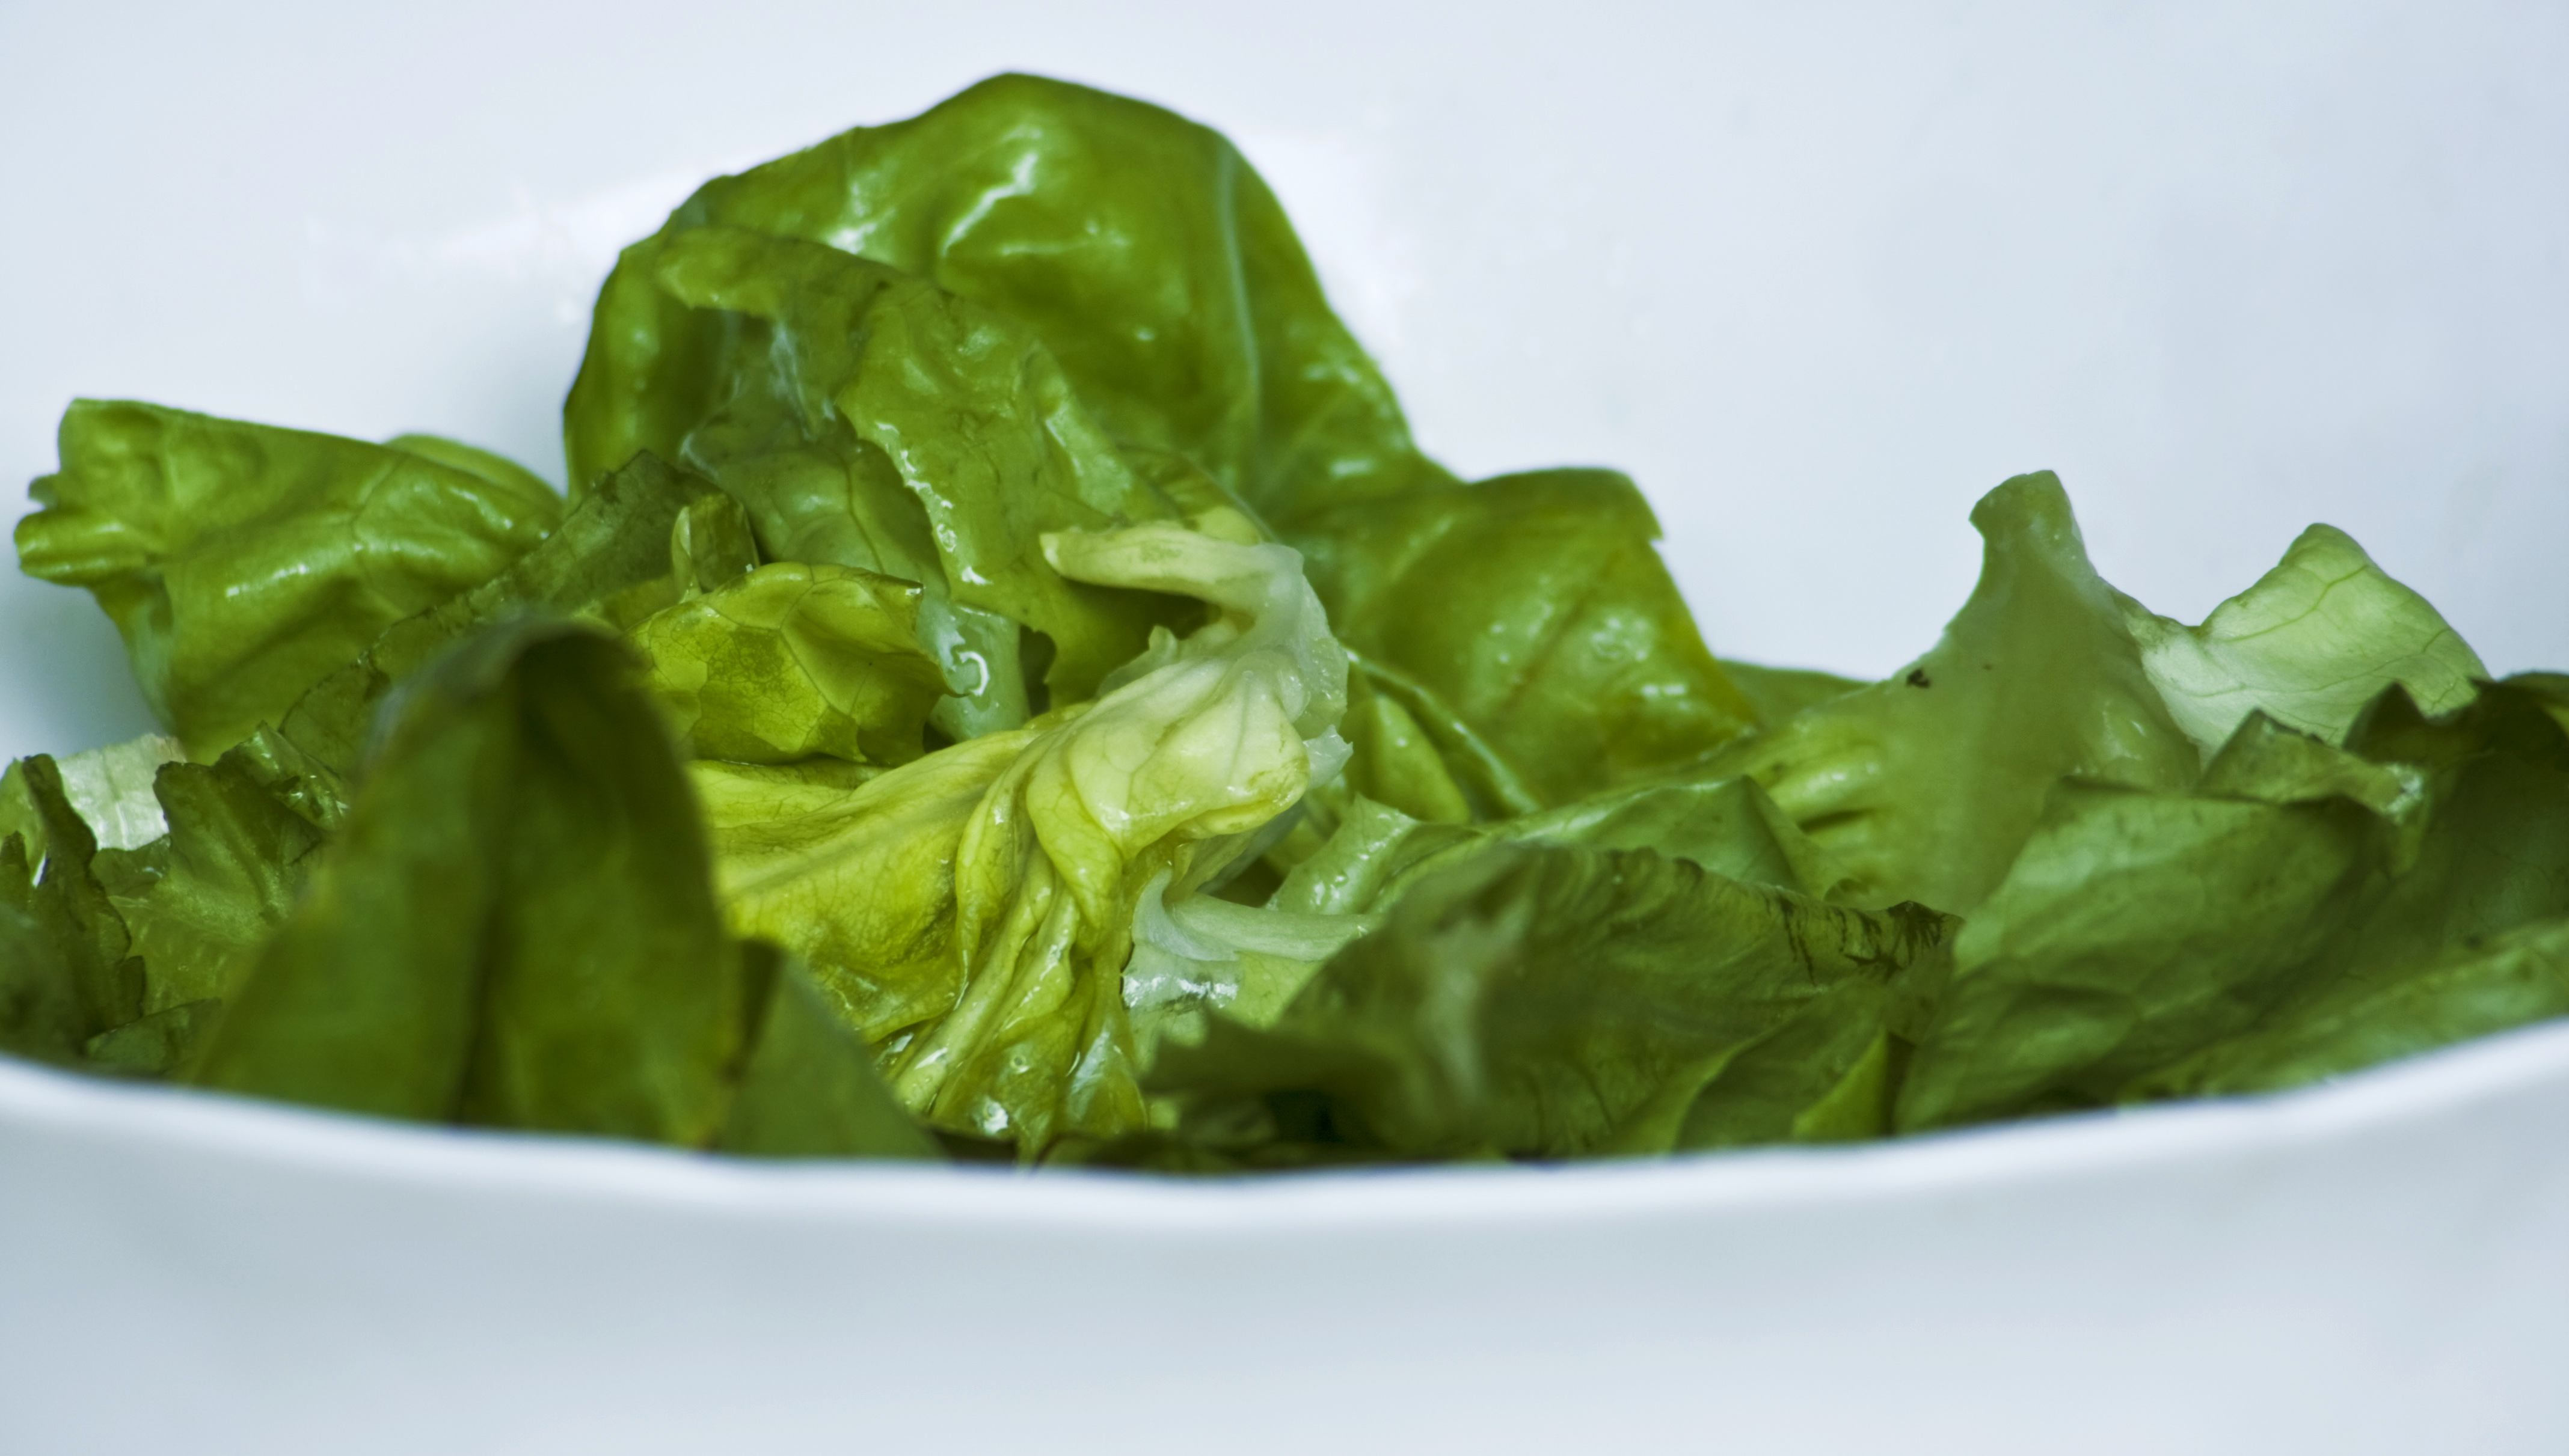 Don't eat dry lettuce while on Phase 2 of the HCG Diet.... there are plently types of HCG safe dressings. Click here to see the dressings NOW!